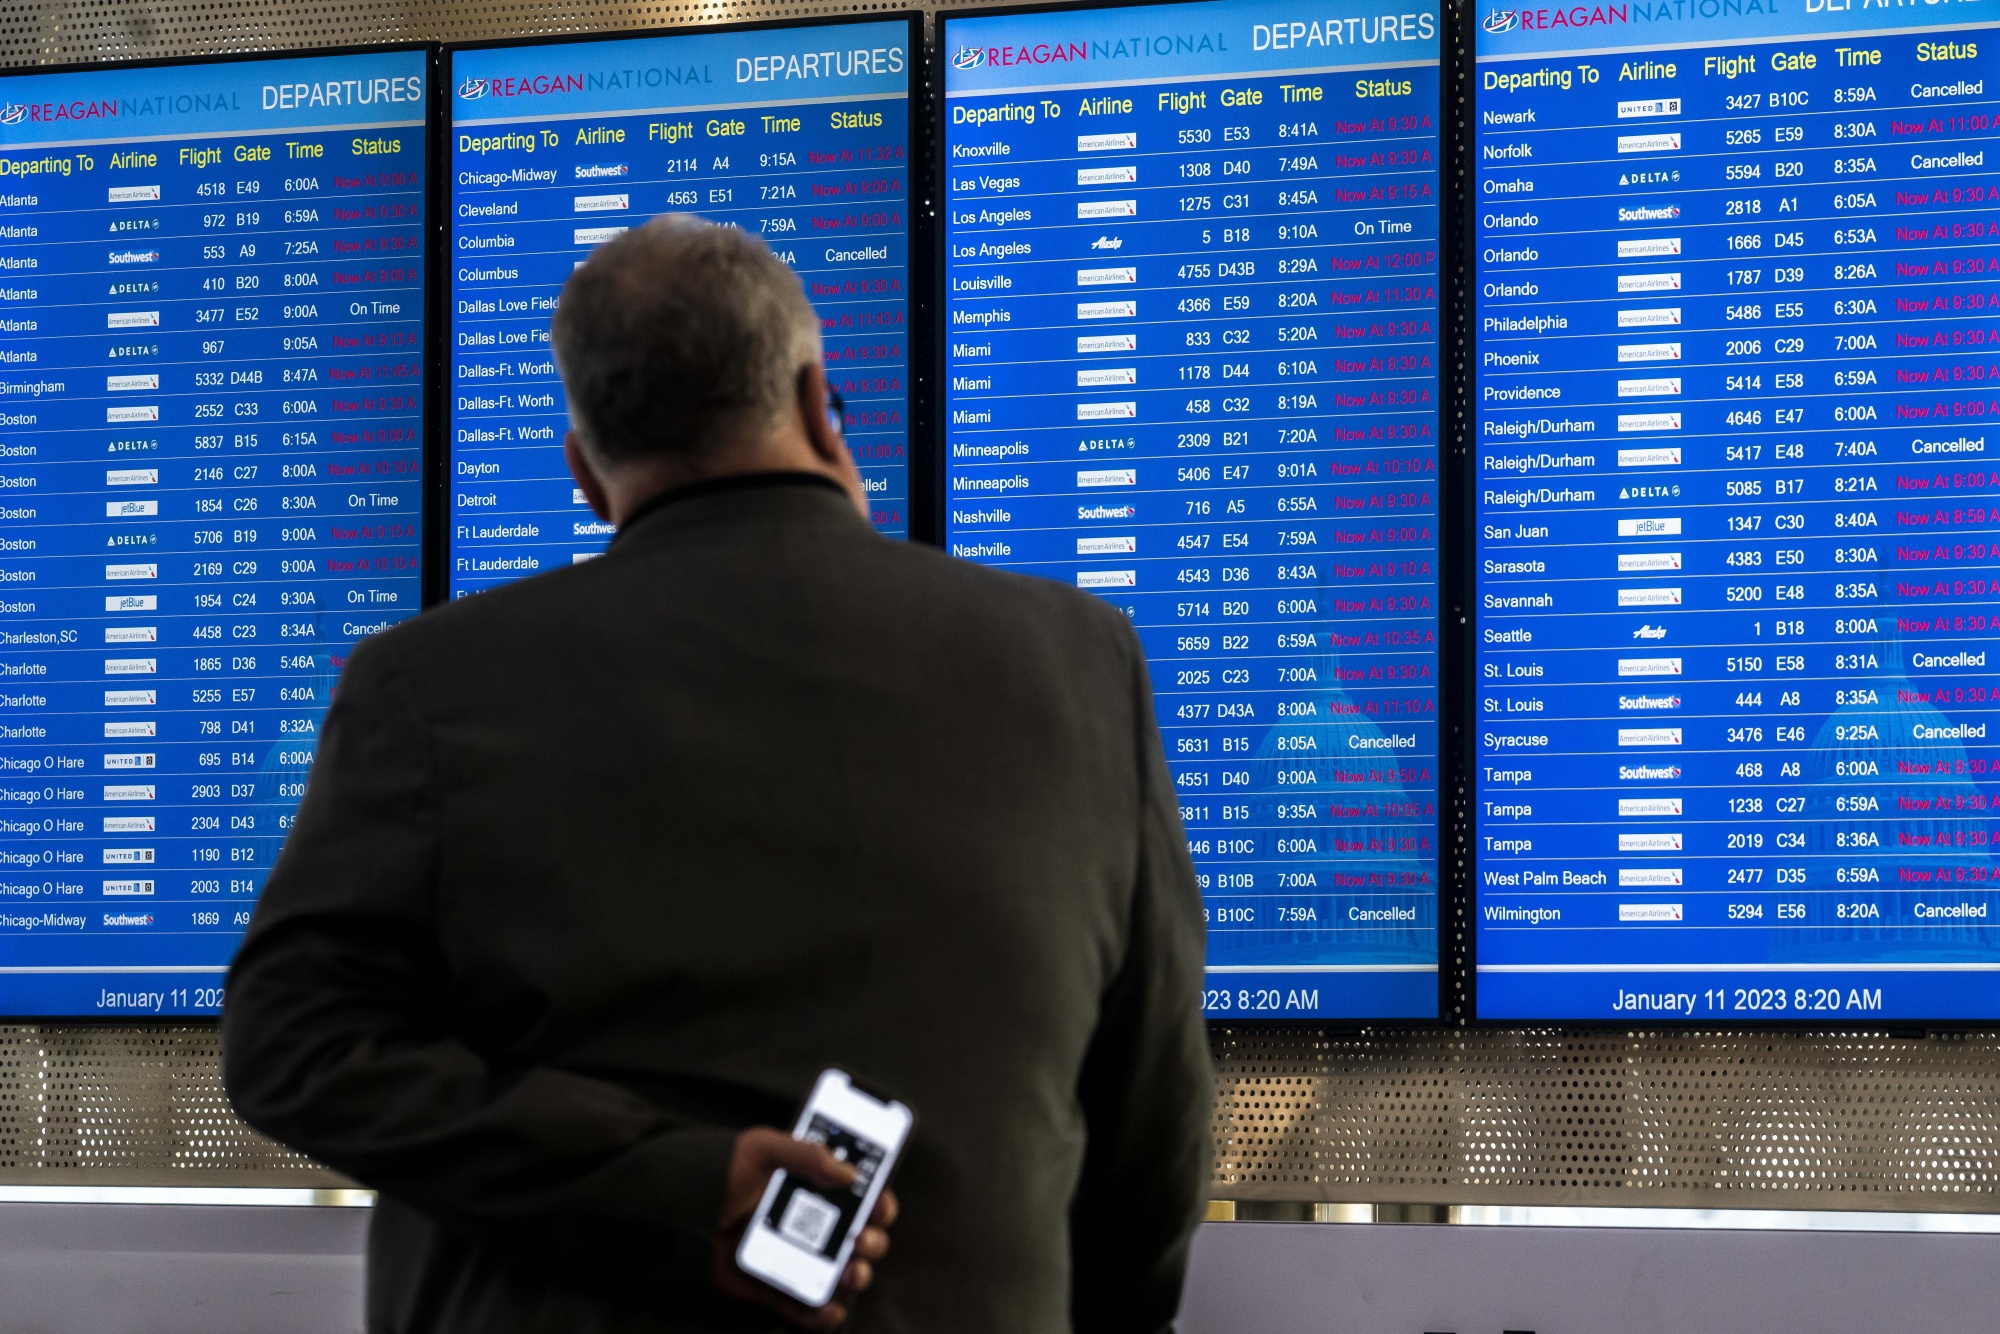 US Flights Resume After FAA Computer Outage Disrupts Air Travel Nationwide  - Bloomberg